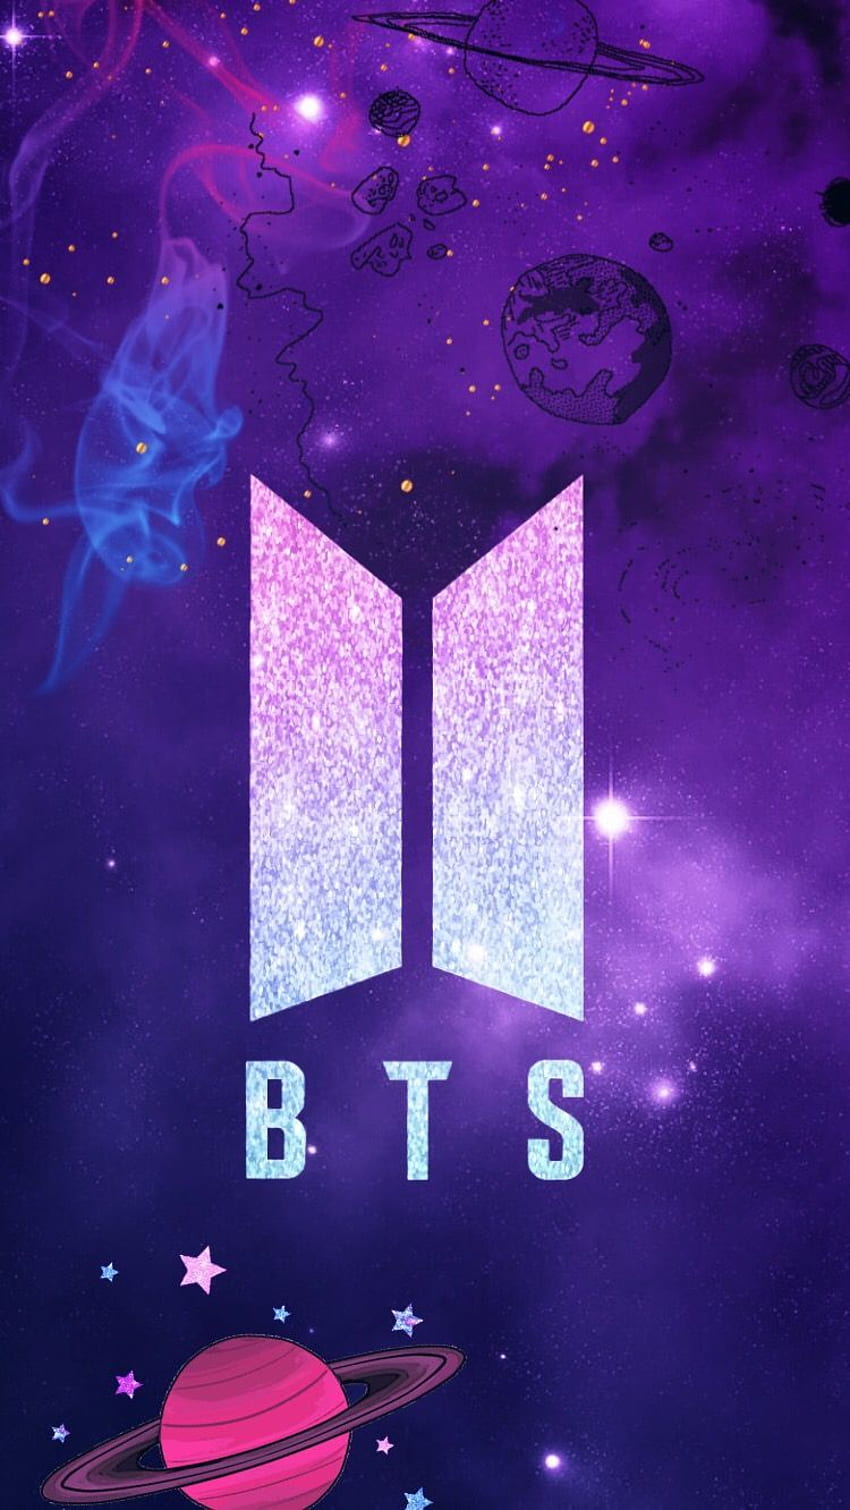 Bts army logo - Top vector, png, psd files on Nohat.cc